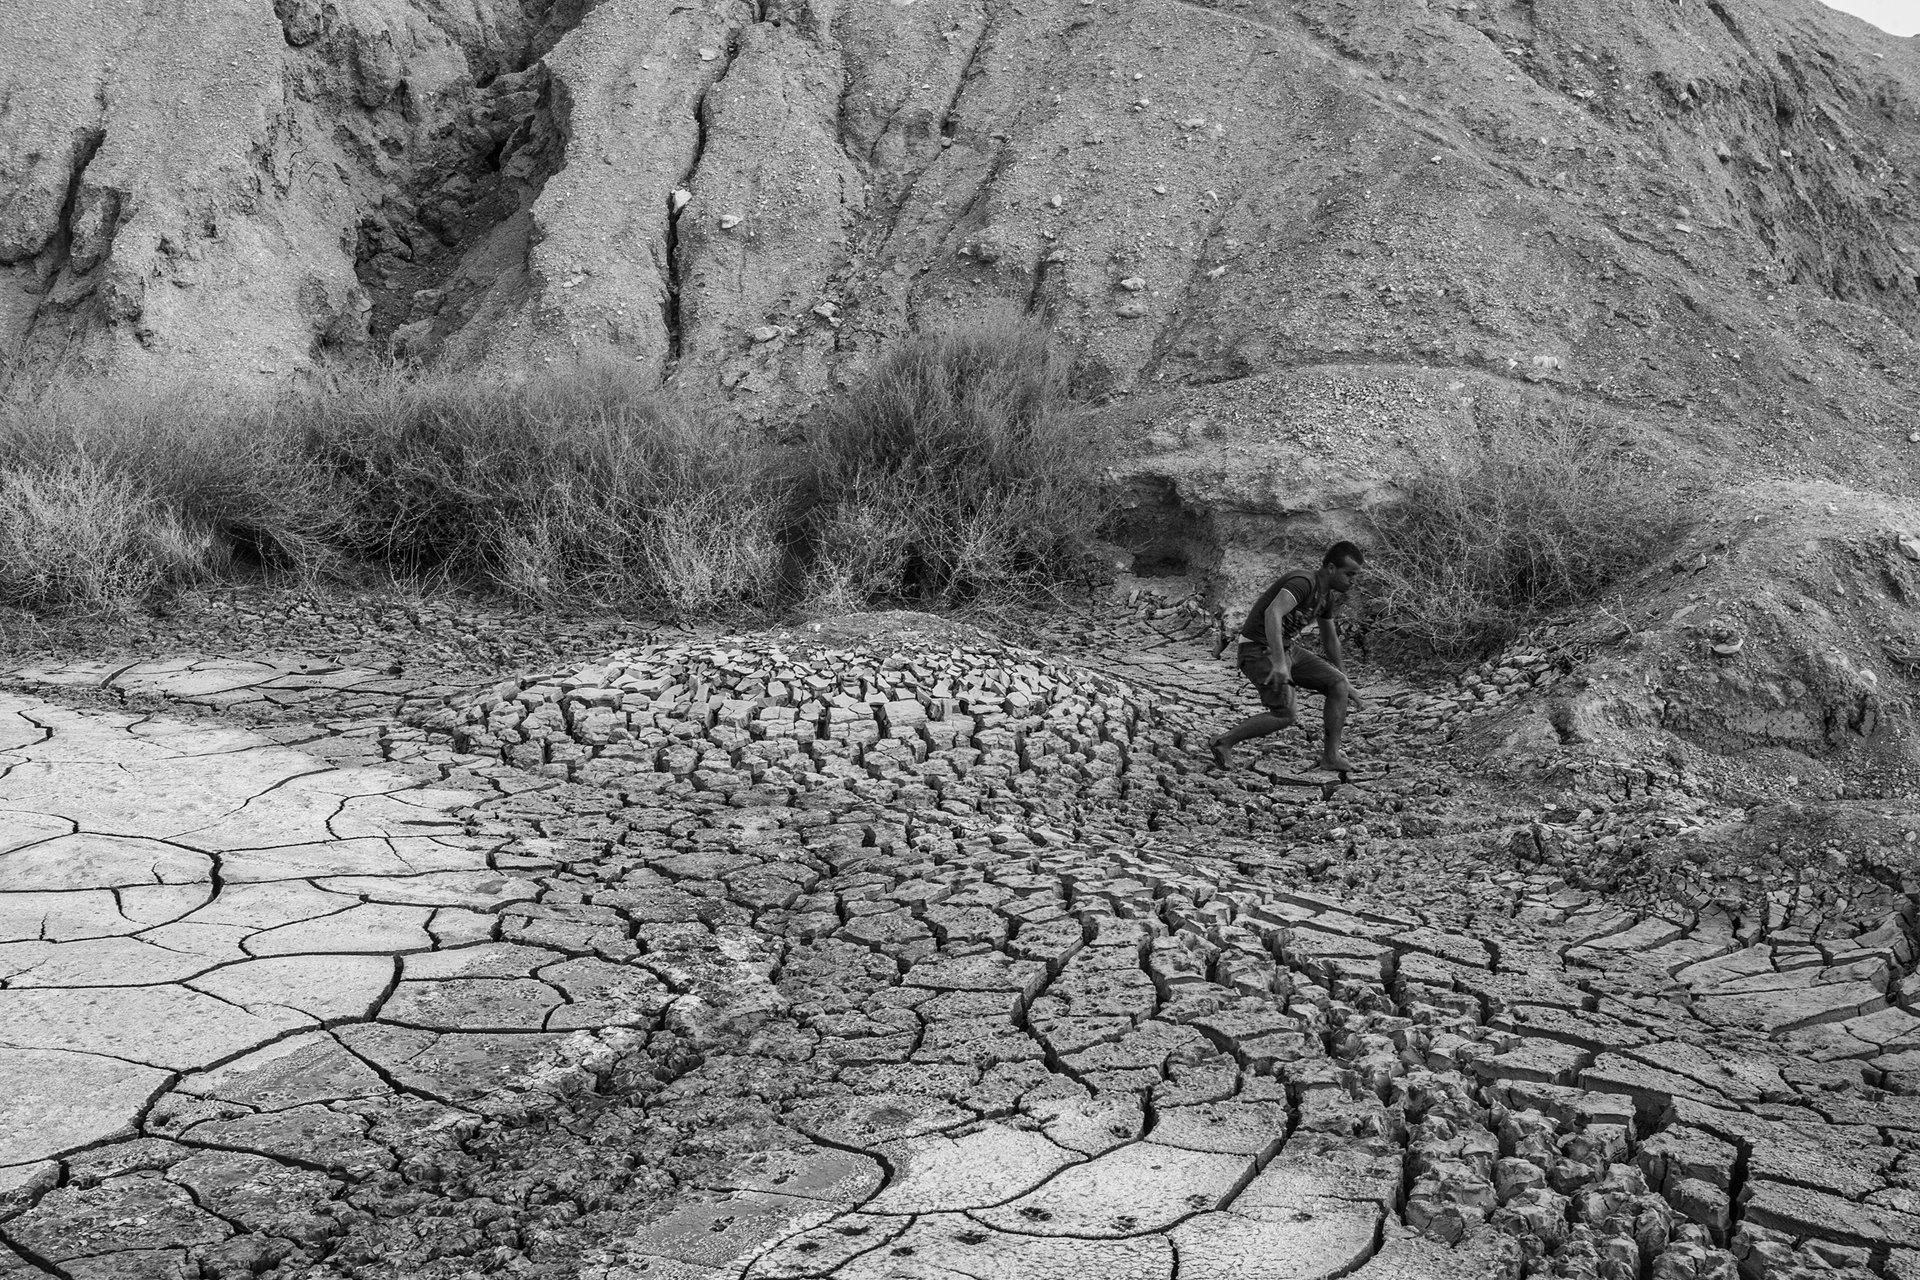 A man crosses an outflow of dried, muddy chemical waste in Al-Mitlawi, Gafsa, Tunisia. Phosphate, Tunisia&rsquo;s main export commodity, comes from mines in the Gafsa region and is one of the main sources of state income. Many waterways are contaminated by waste products created during the production of phosphoric acid.